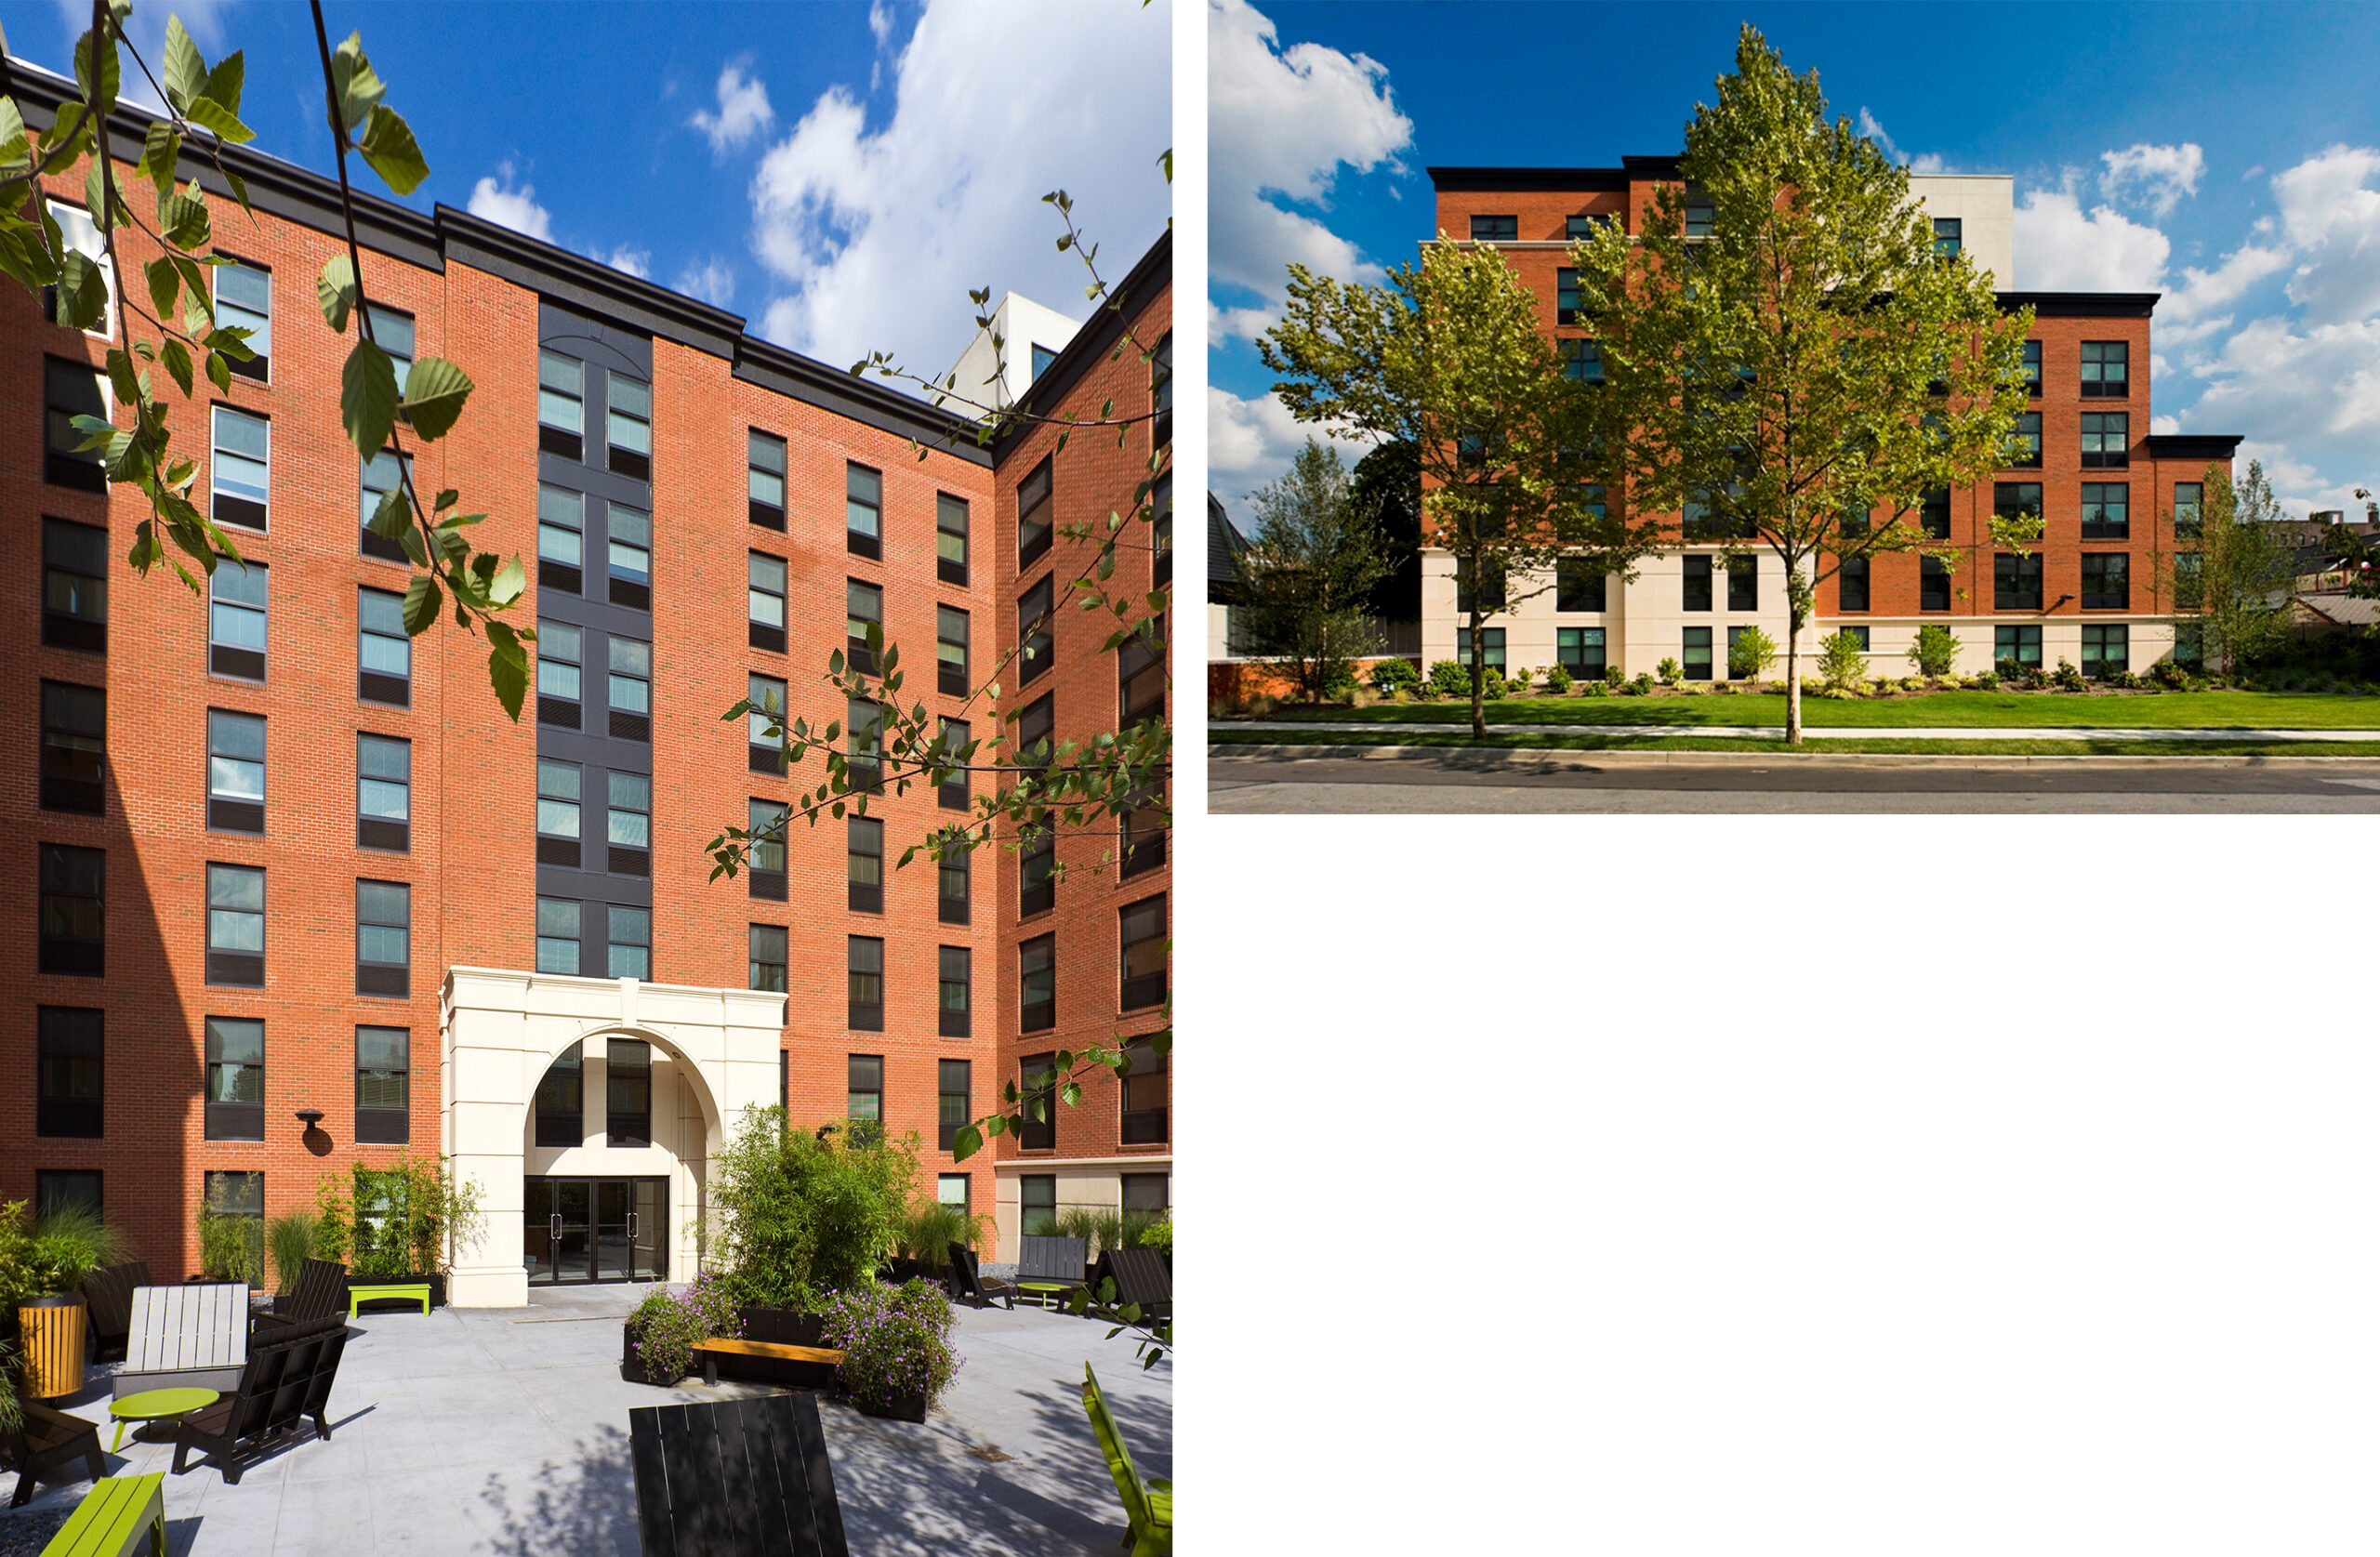 two images side by side showing a brick building forom two angles